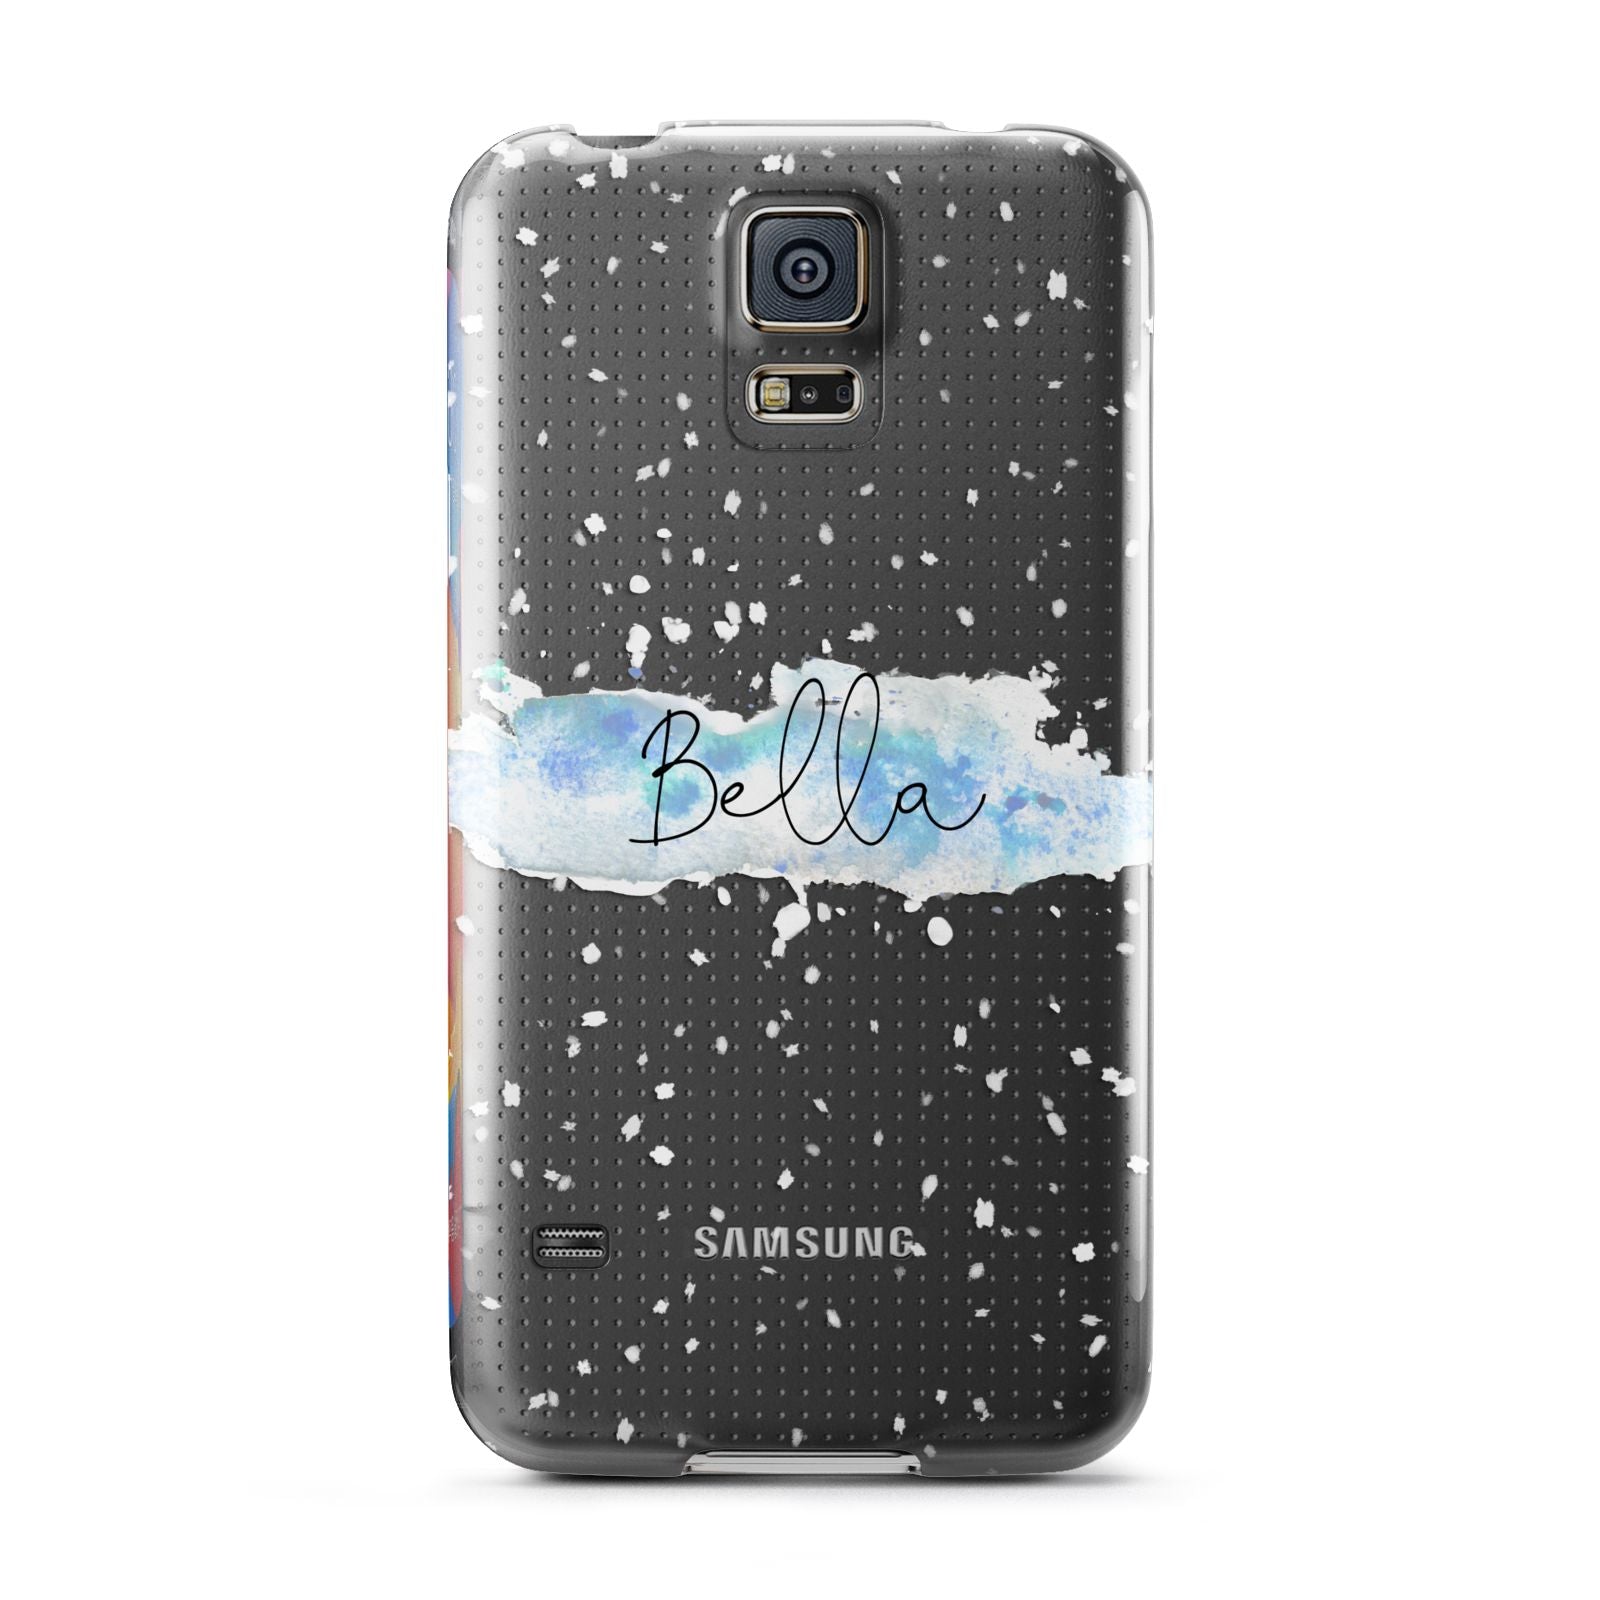 Personalised Christmas Snow fall Samsung Galaxy S5 Case